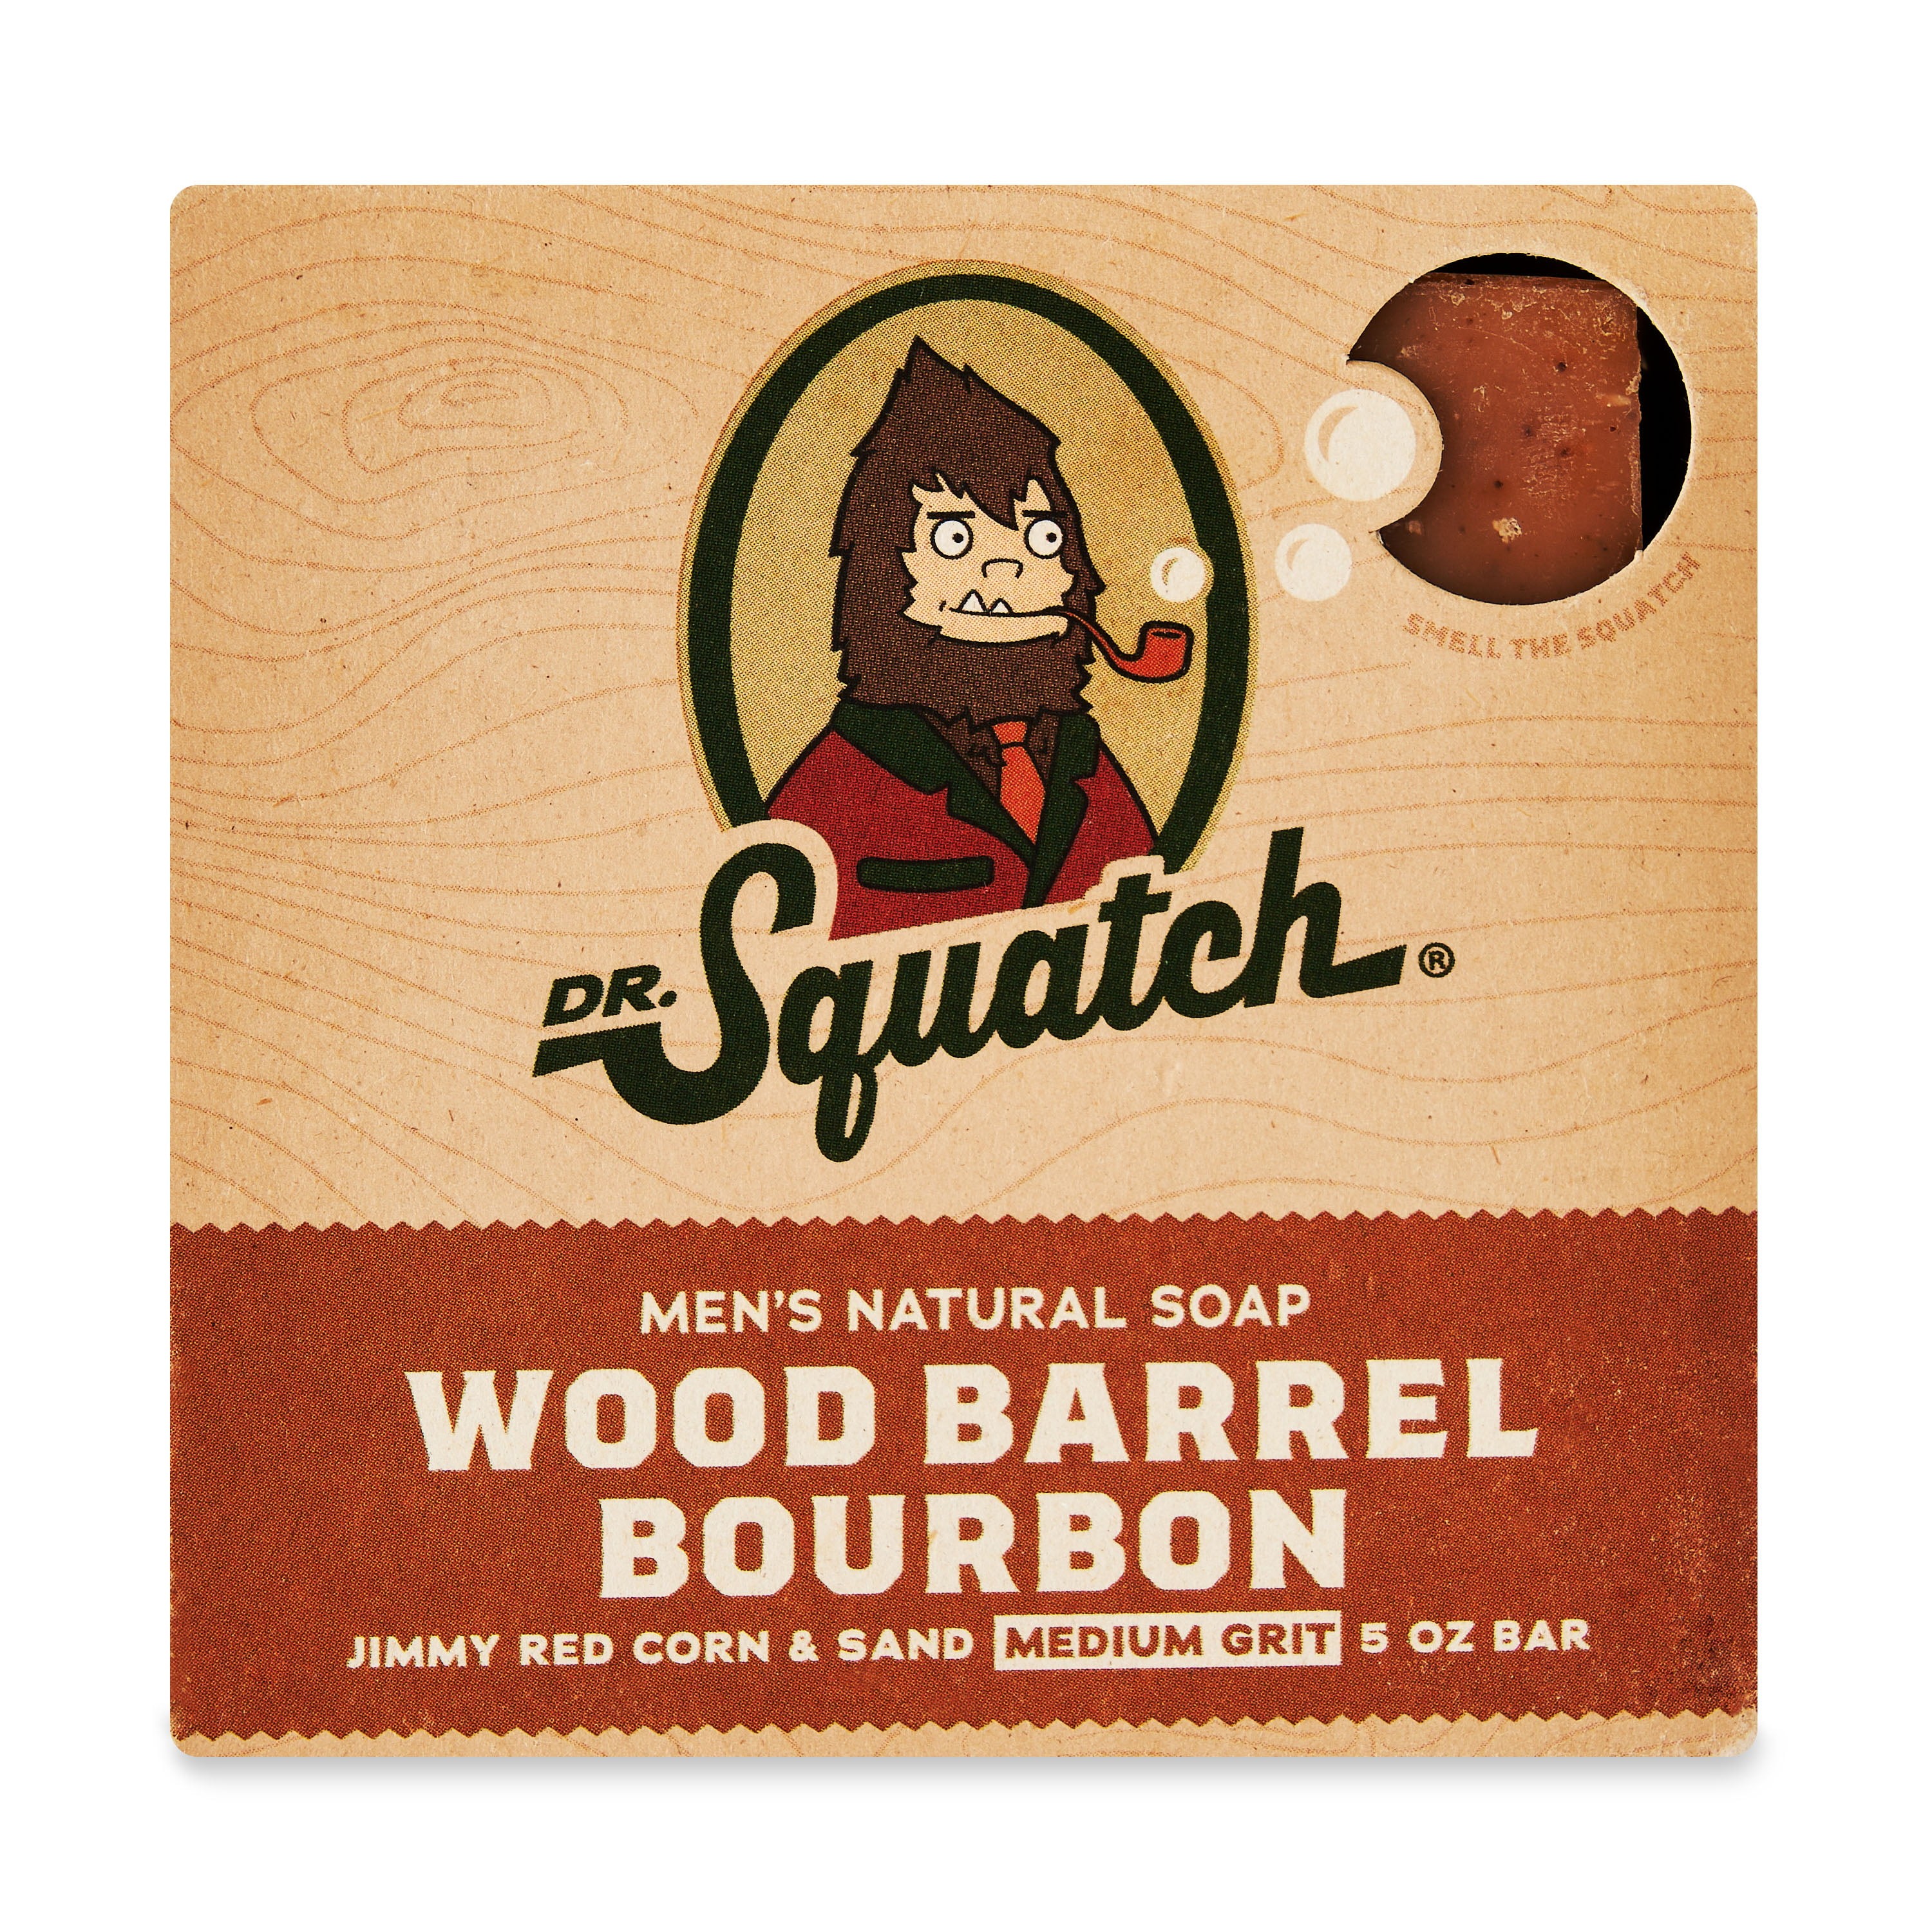 Dr. Squatch: 🔥 NEW PRODUCT ALERT 🔥 Introducing the Squatch Candle w/ FREE  Shipping